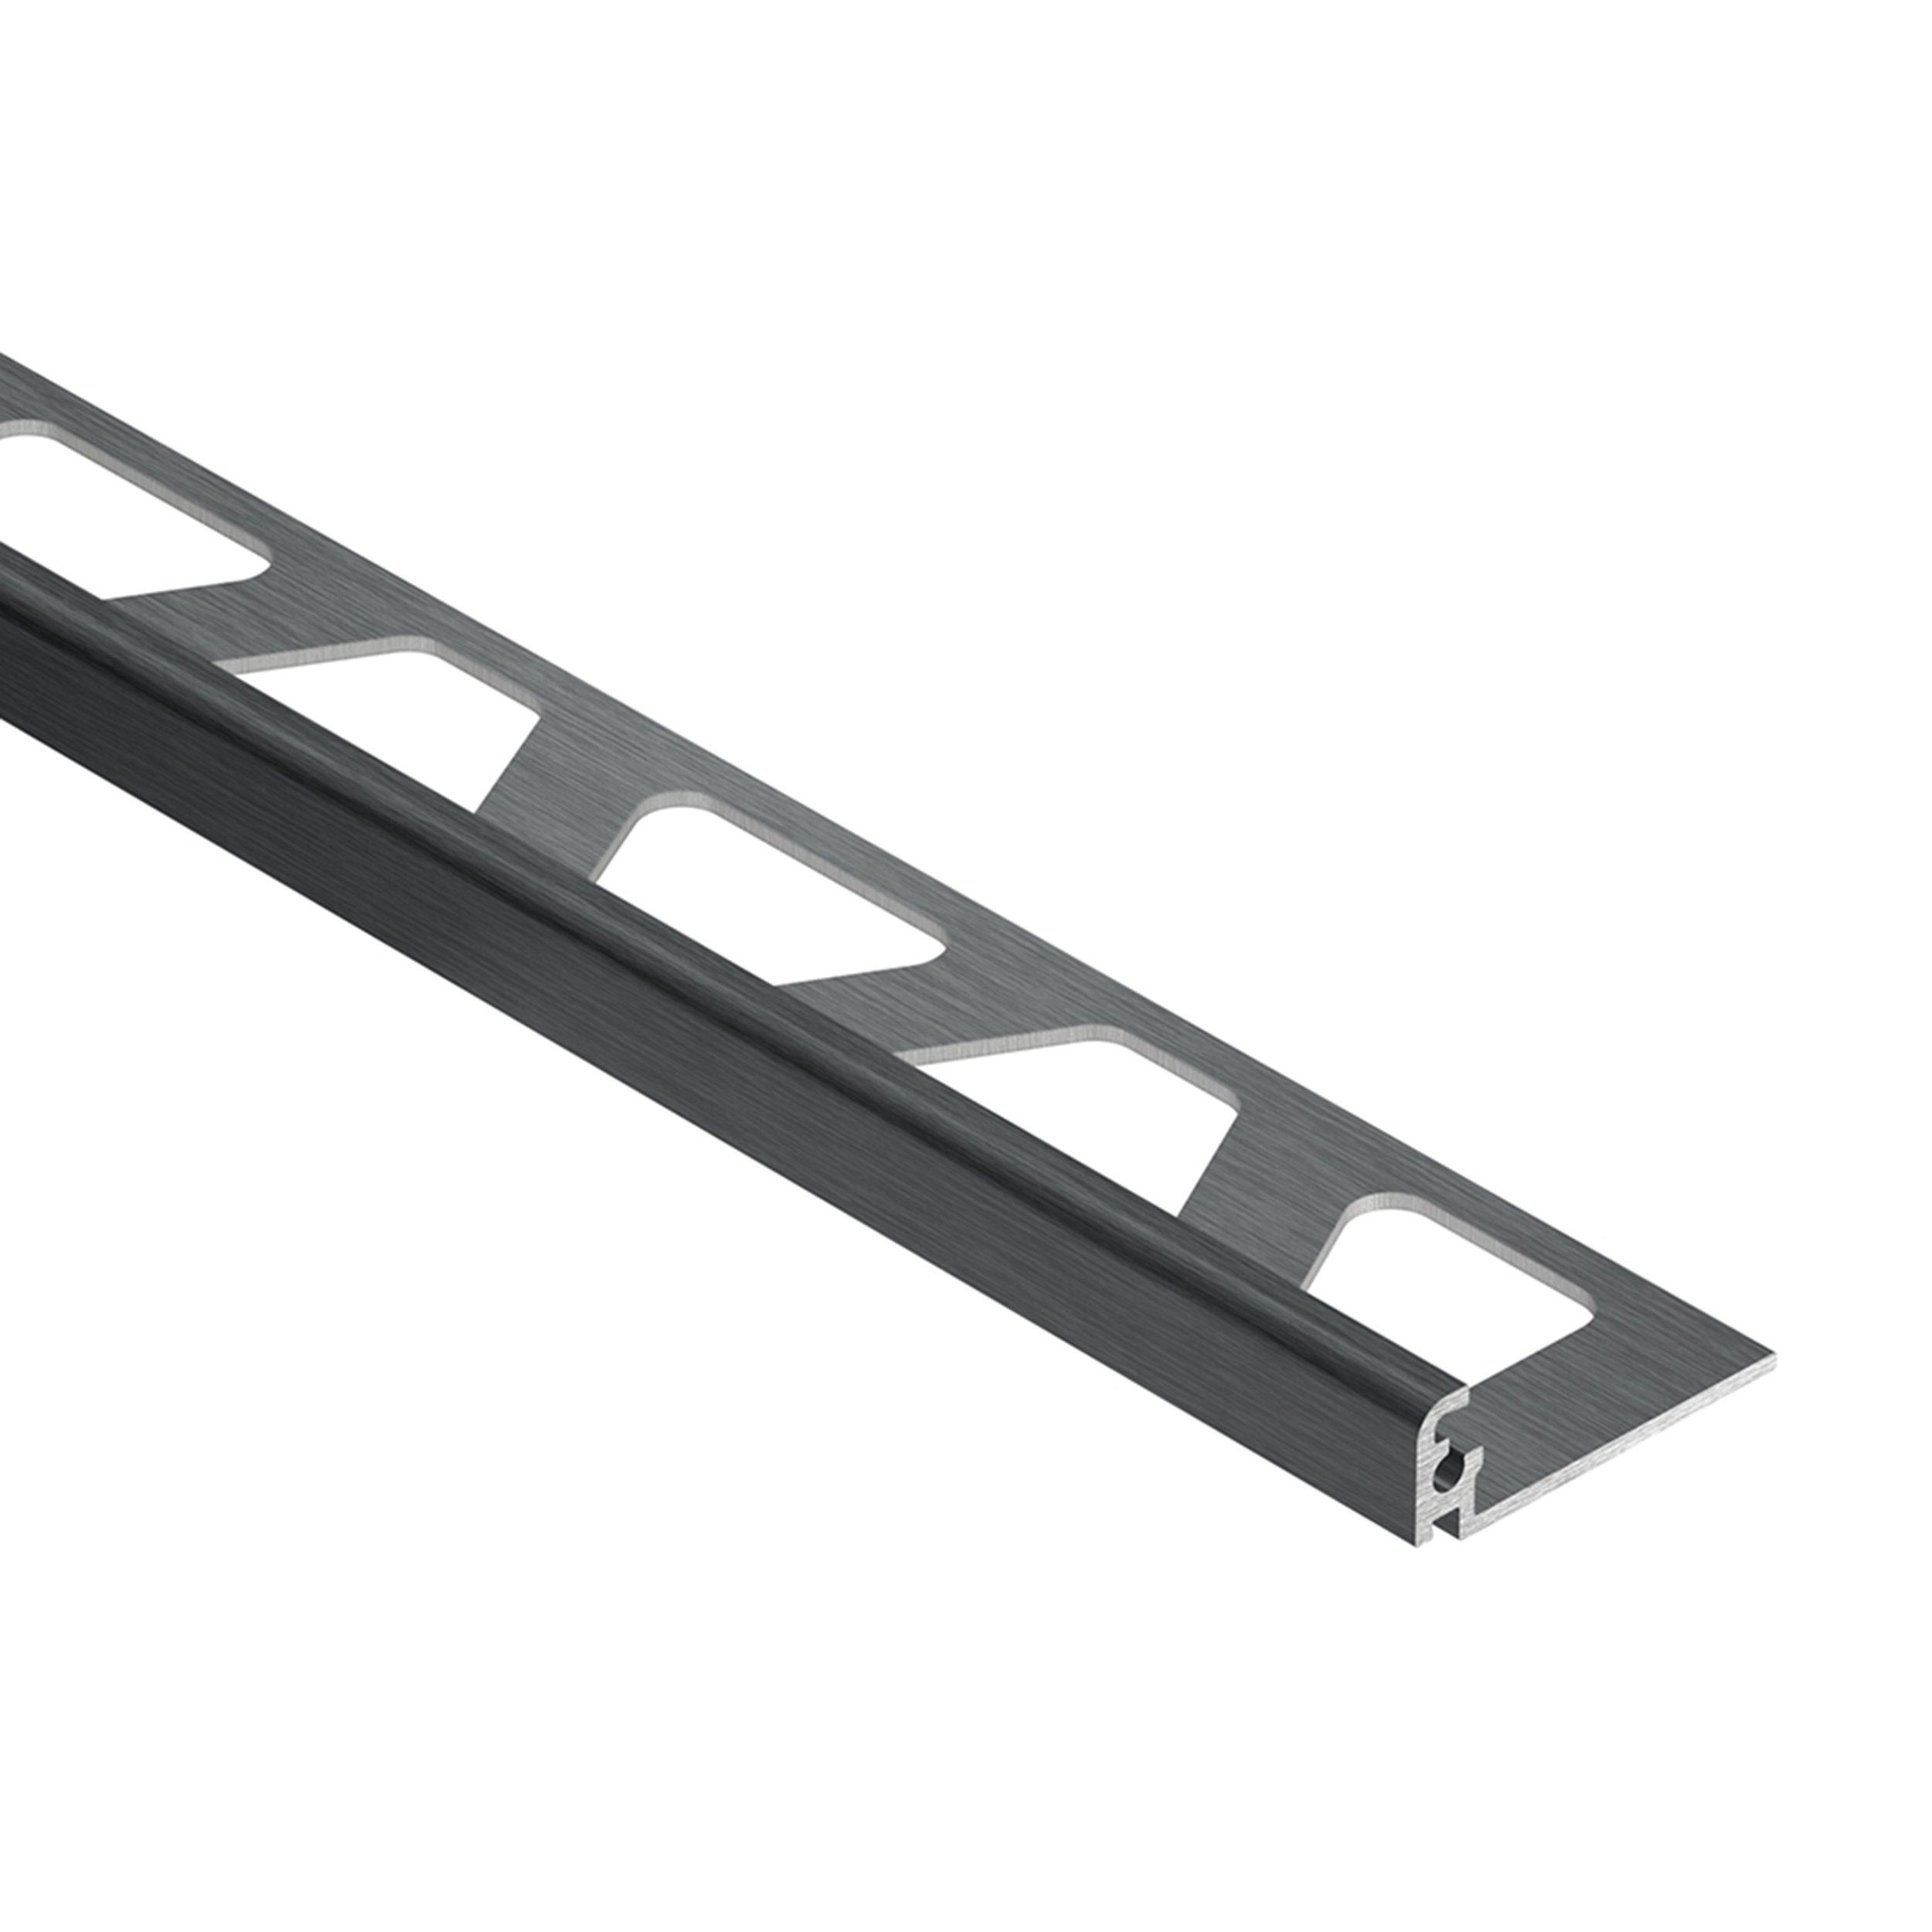 Schluter Jolly Edge Trim 5/16in. Anodized Aluminum Brushed Graphite